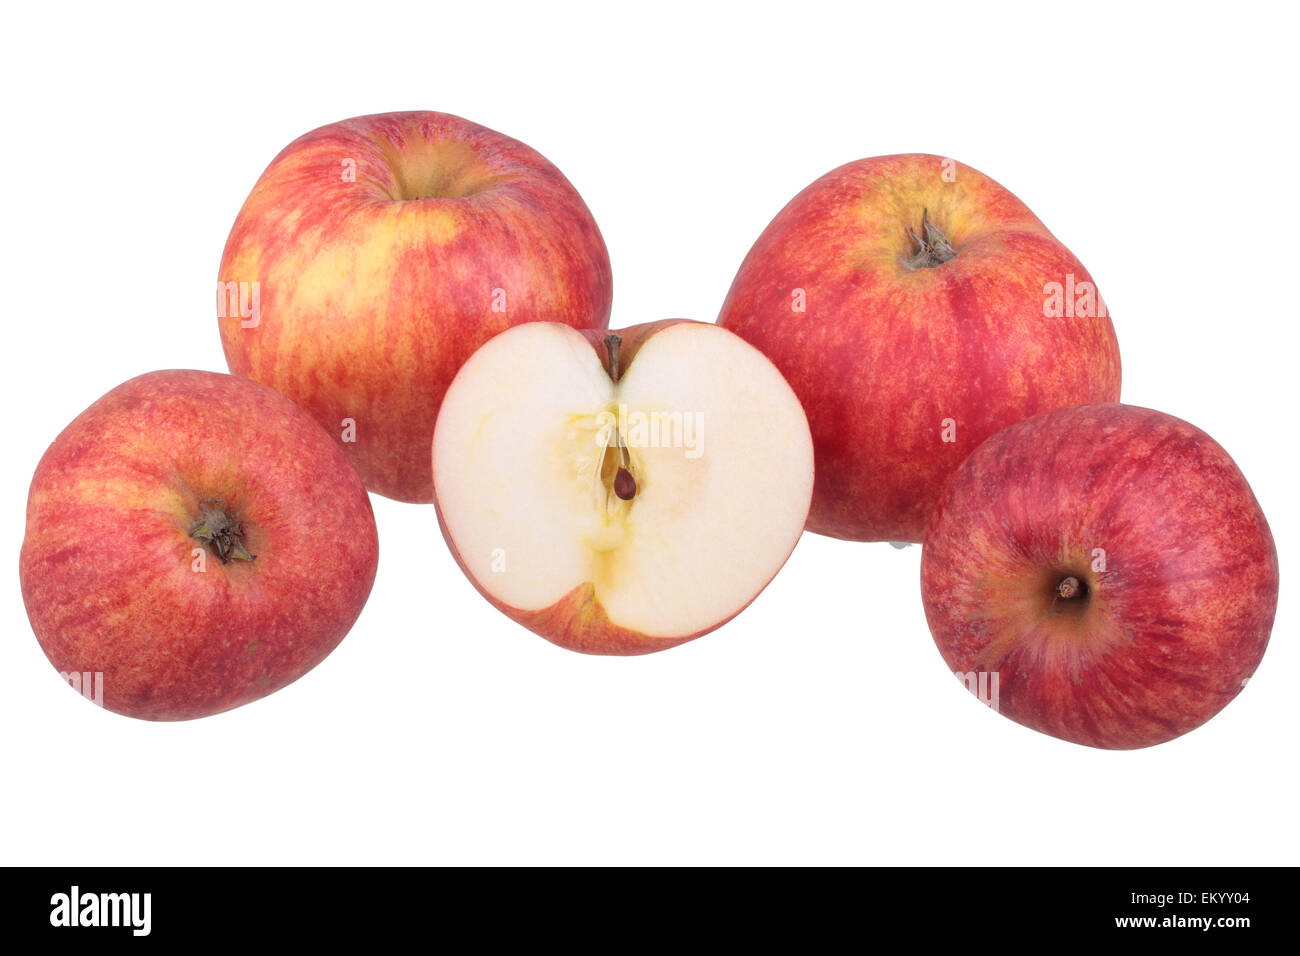 Red Gravenstein apple variety with cut apple Stock Photo